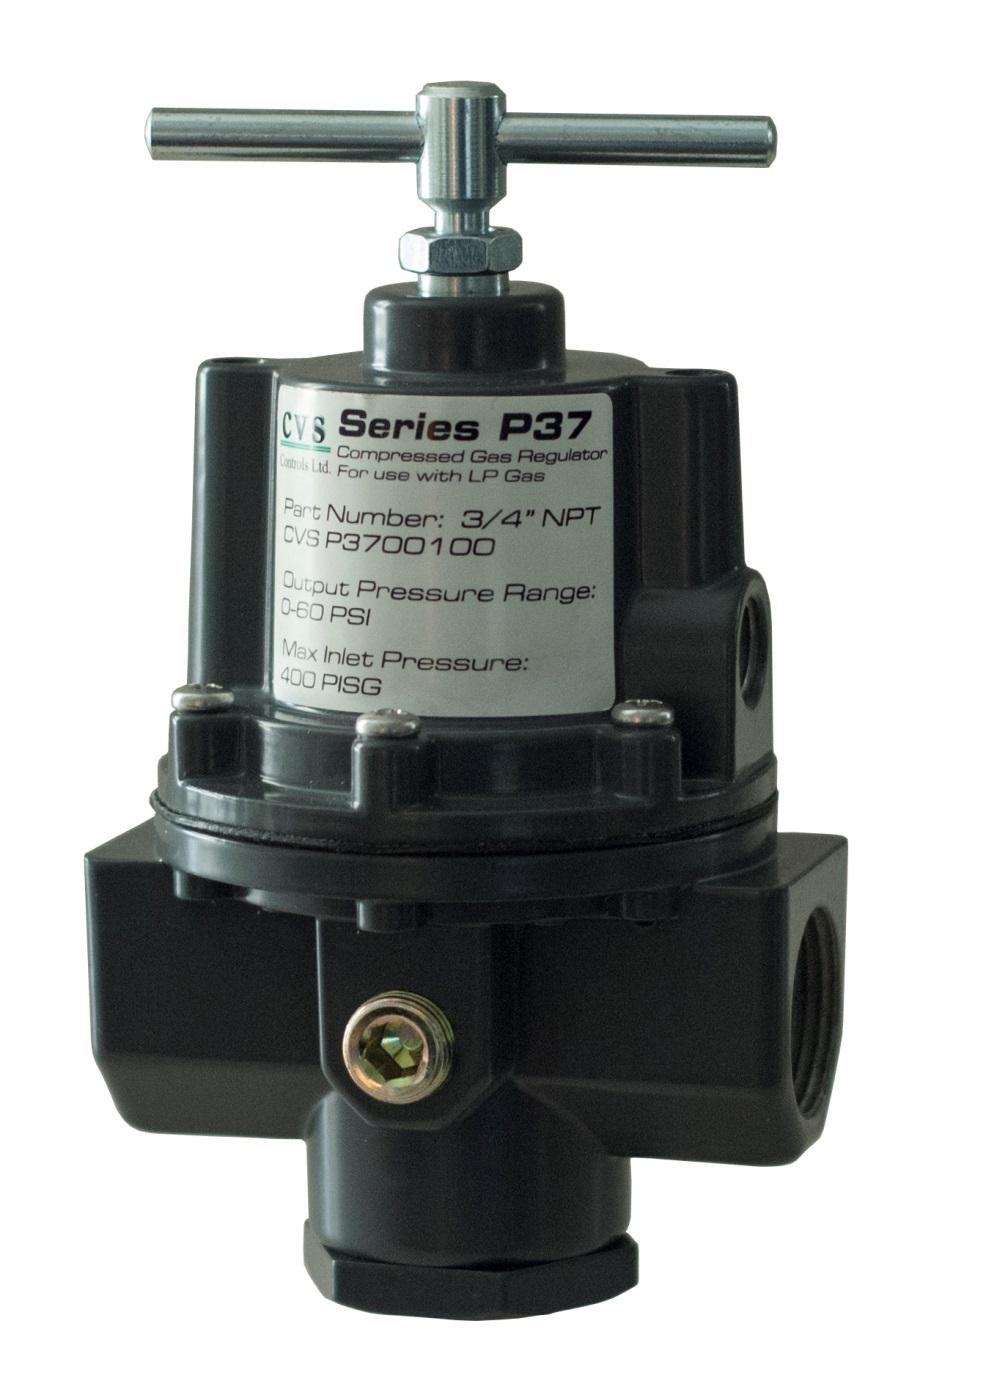 INSTRUCTION MANUAL CVS P37 LP Gas Reducing Regulator The CVS Controls P37 Regulator is a non-relieving, pressure reducing regulator suitable for use in LP gas applications (Natural Gas and Propane).